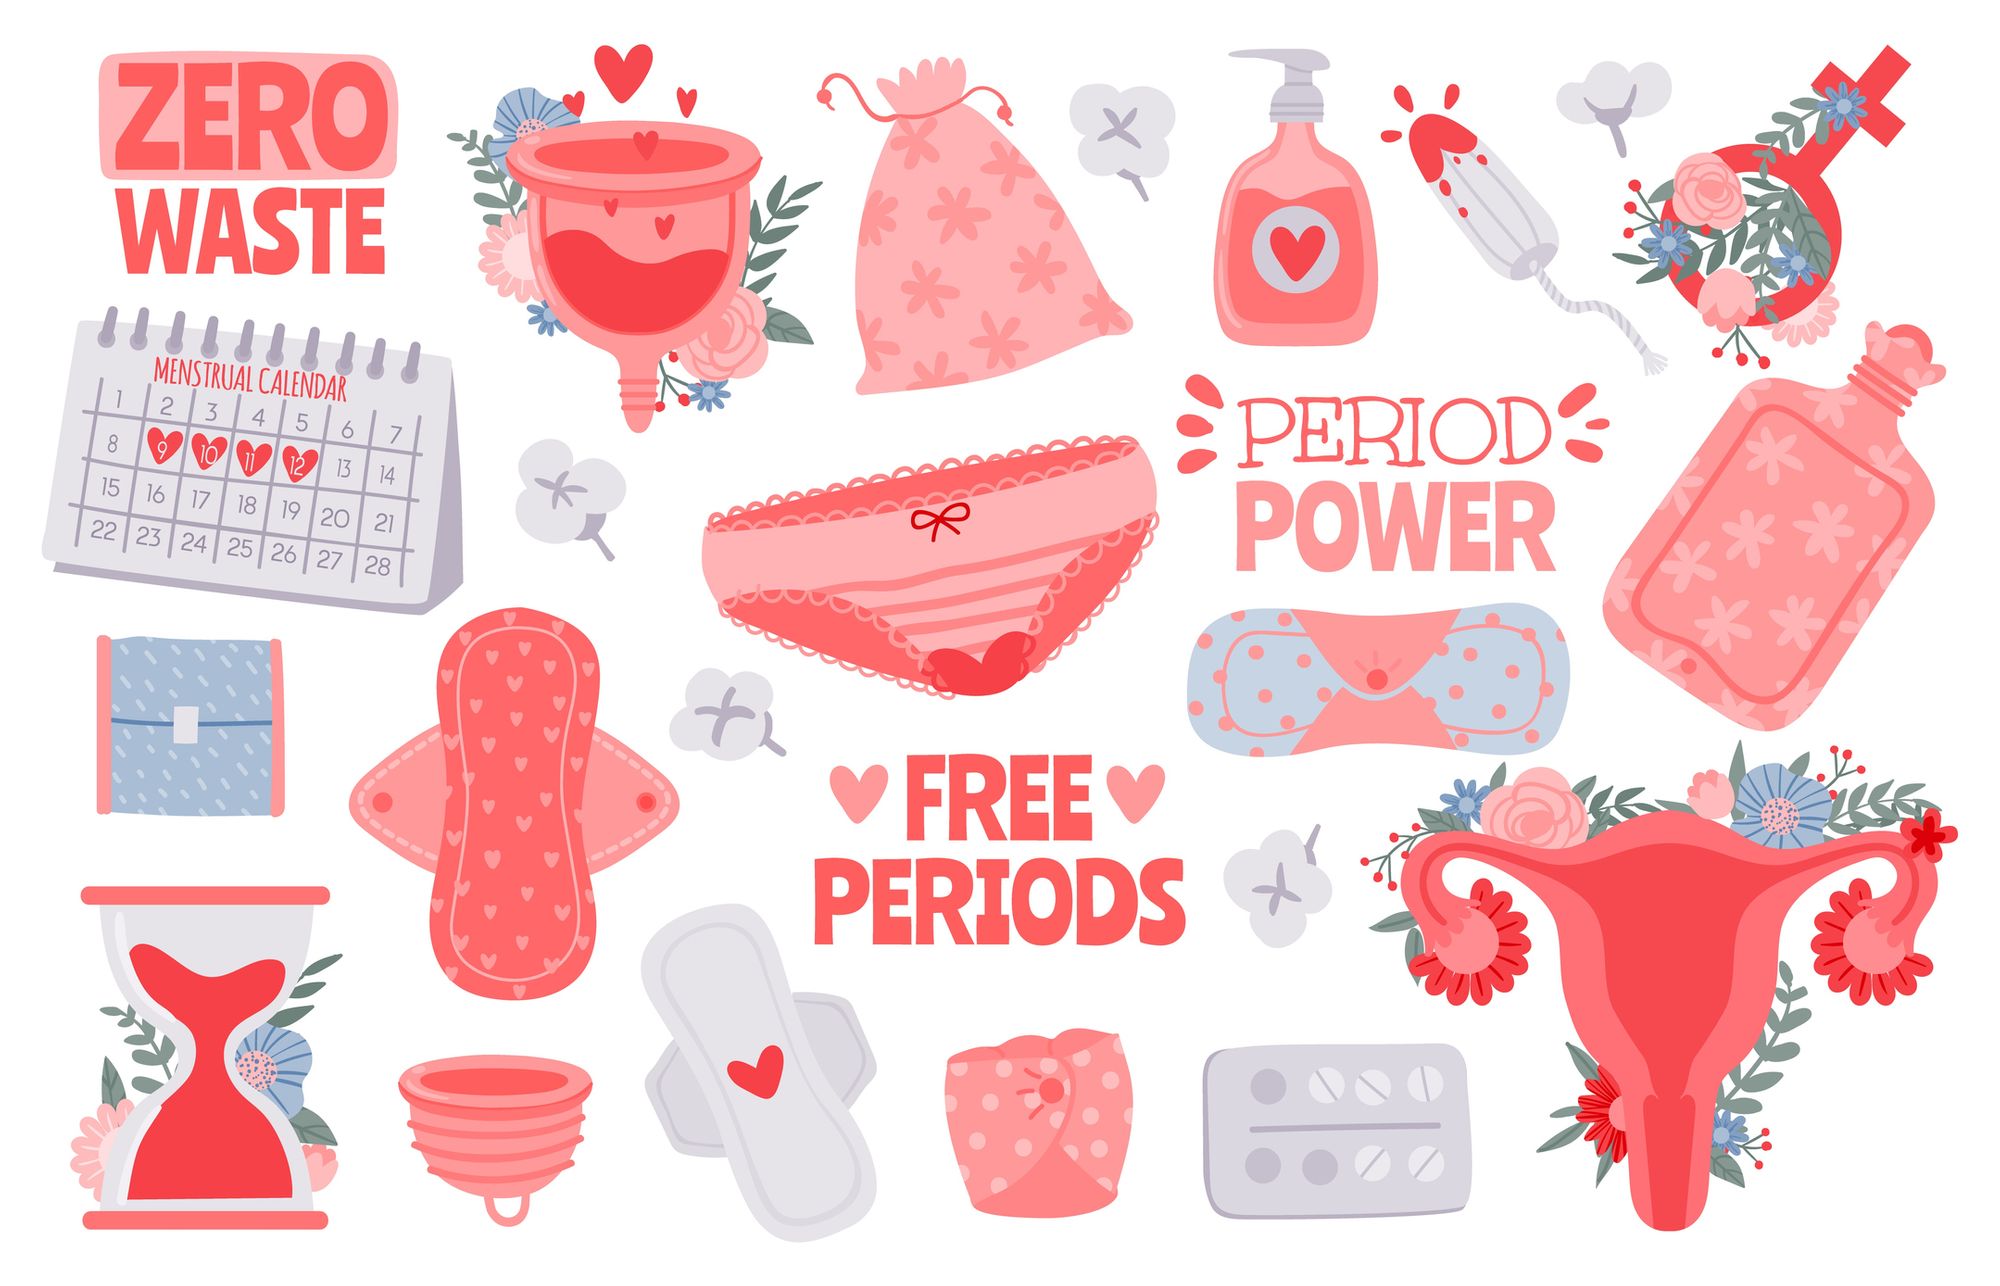 An illustration of different period products.